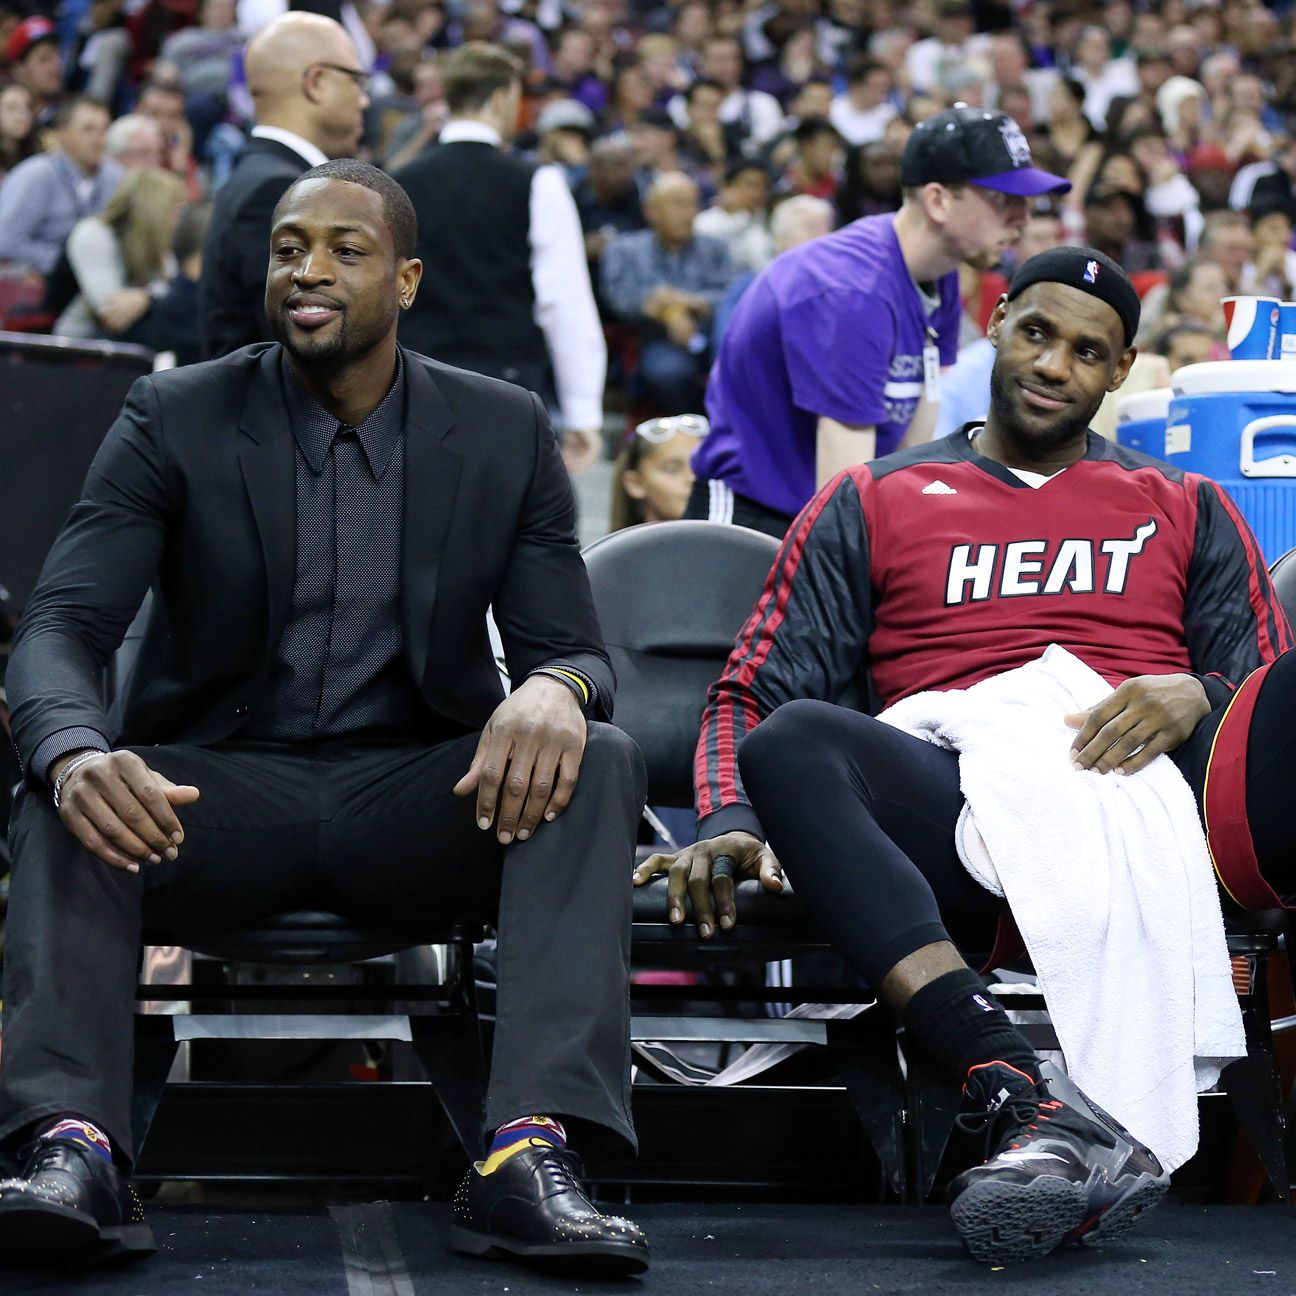 LeBron James says tough for Miami Heat to fill void when Dwyane Wade is out